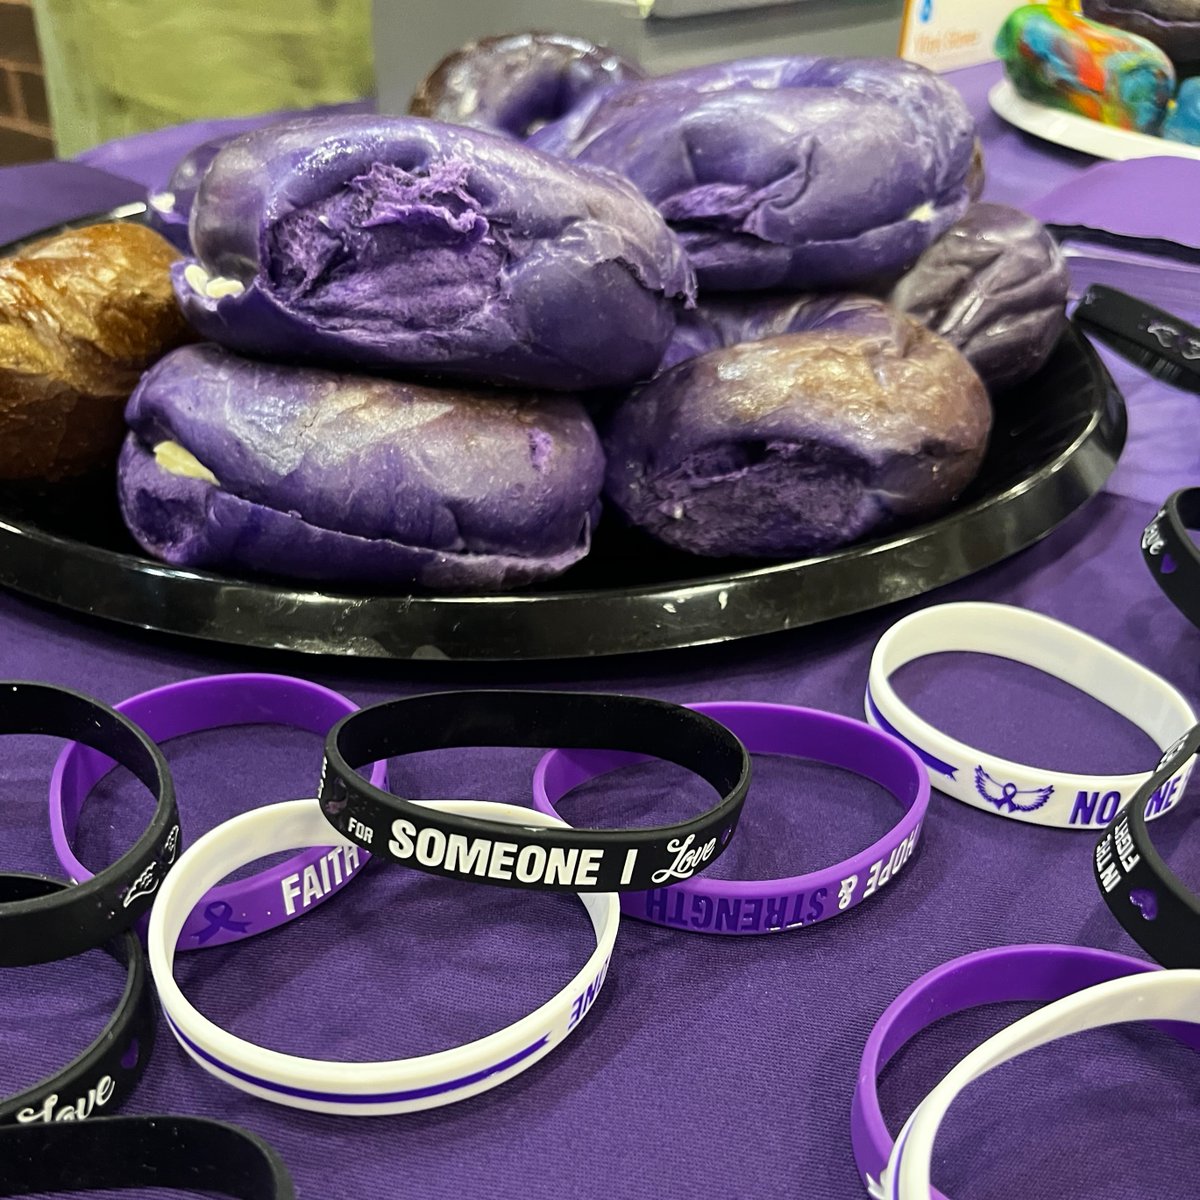 Thank you to the students at @SCSD_AMS for having bake sales to raise funds for the Eastern Long Island #Walk2EndALZ. Register today for #Walk2EndALZ at alz.org/liwalk. @SmithtownCSD